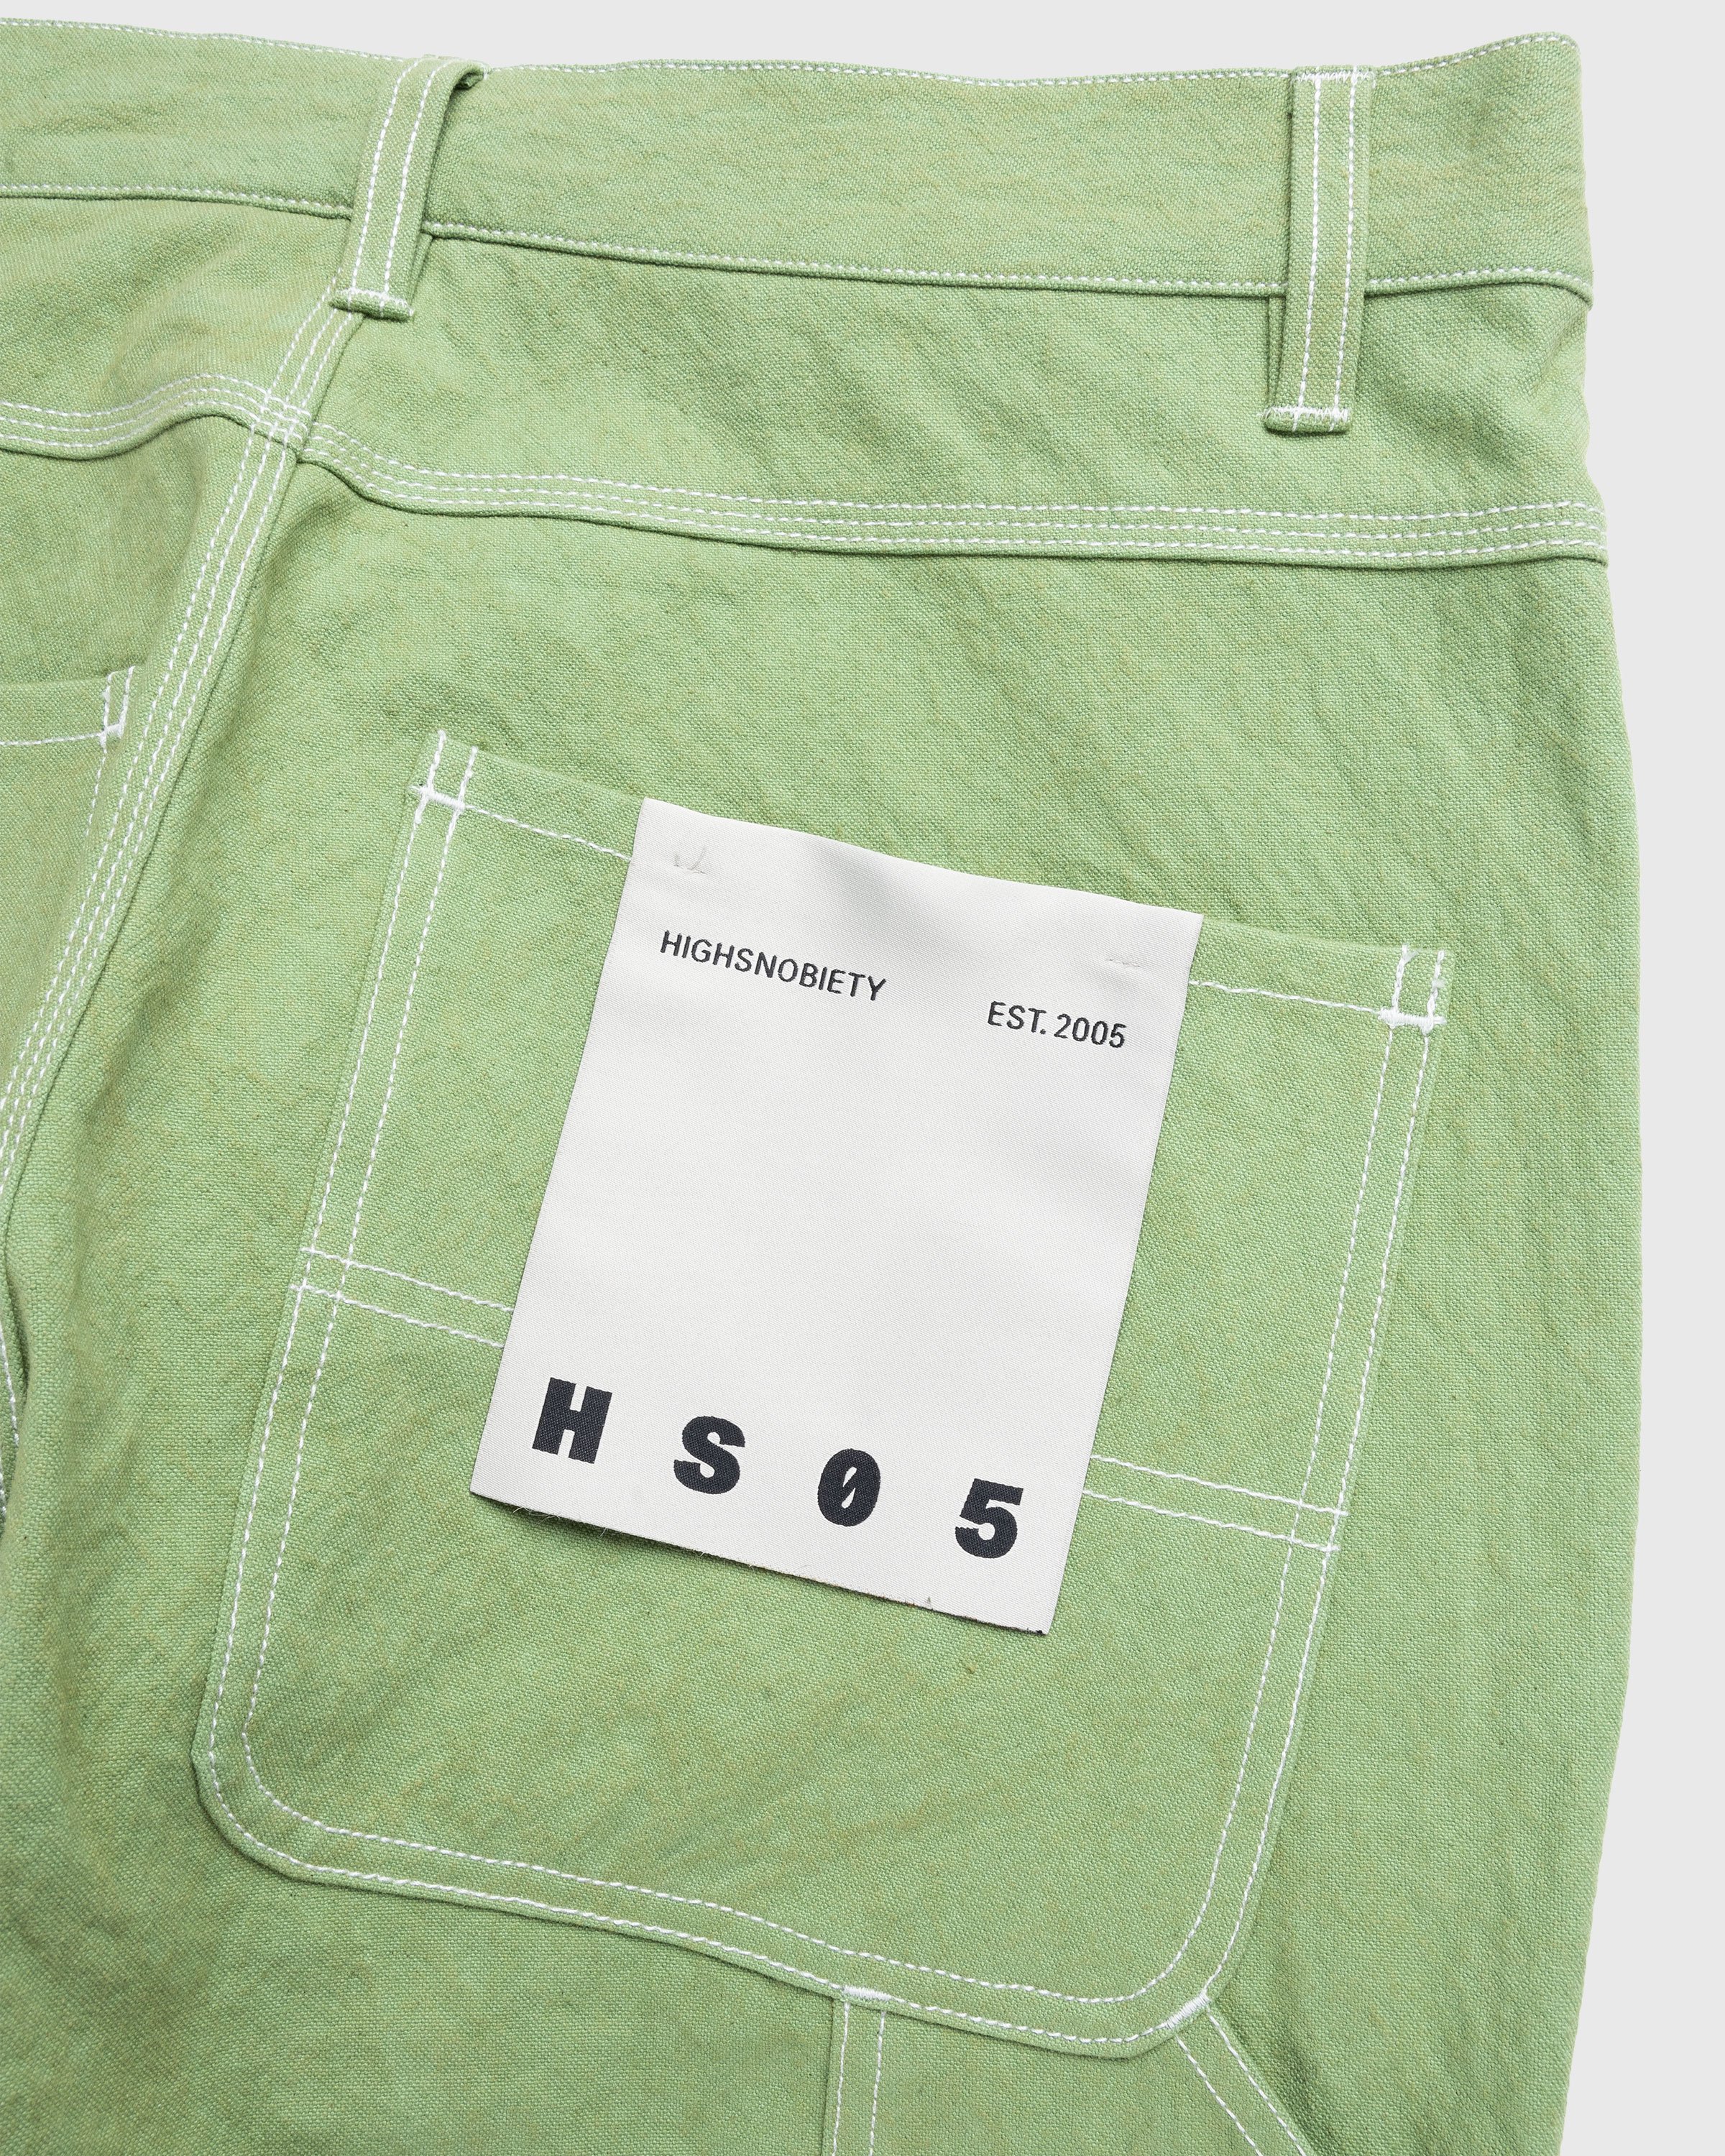 Highsnobiety HS05 - Sun Dried Canvas Carpenter Pants Green - Clothing - Green - Image 7